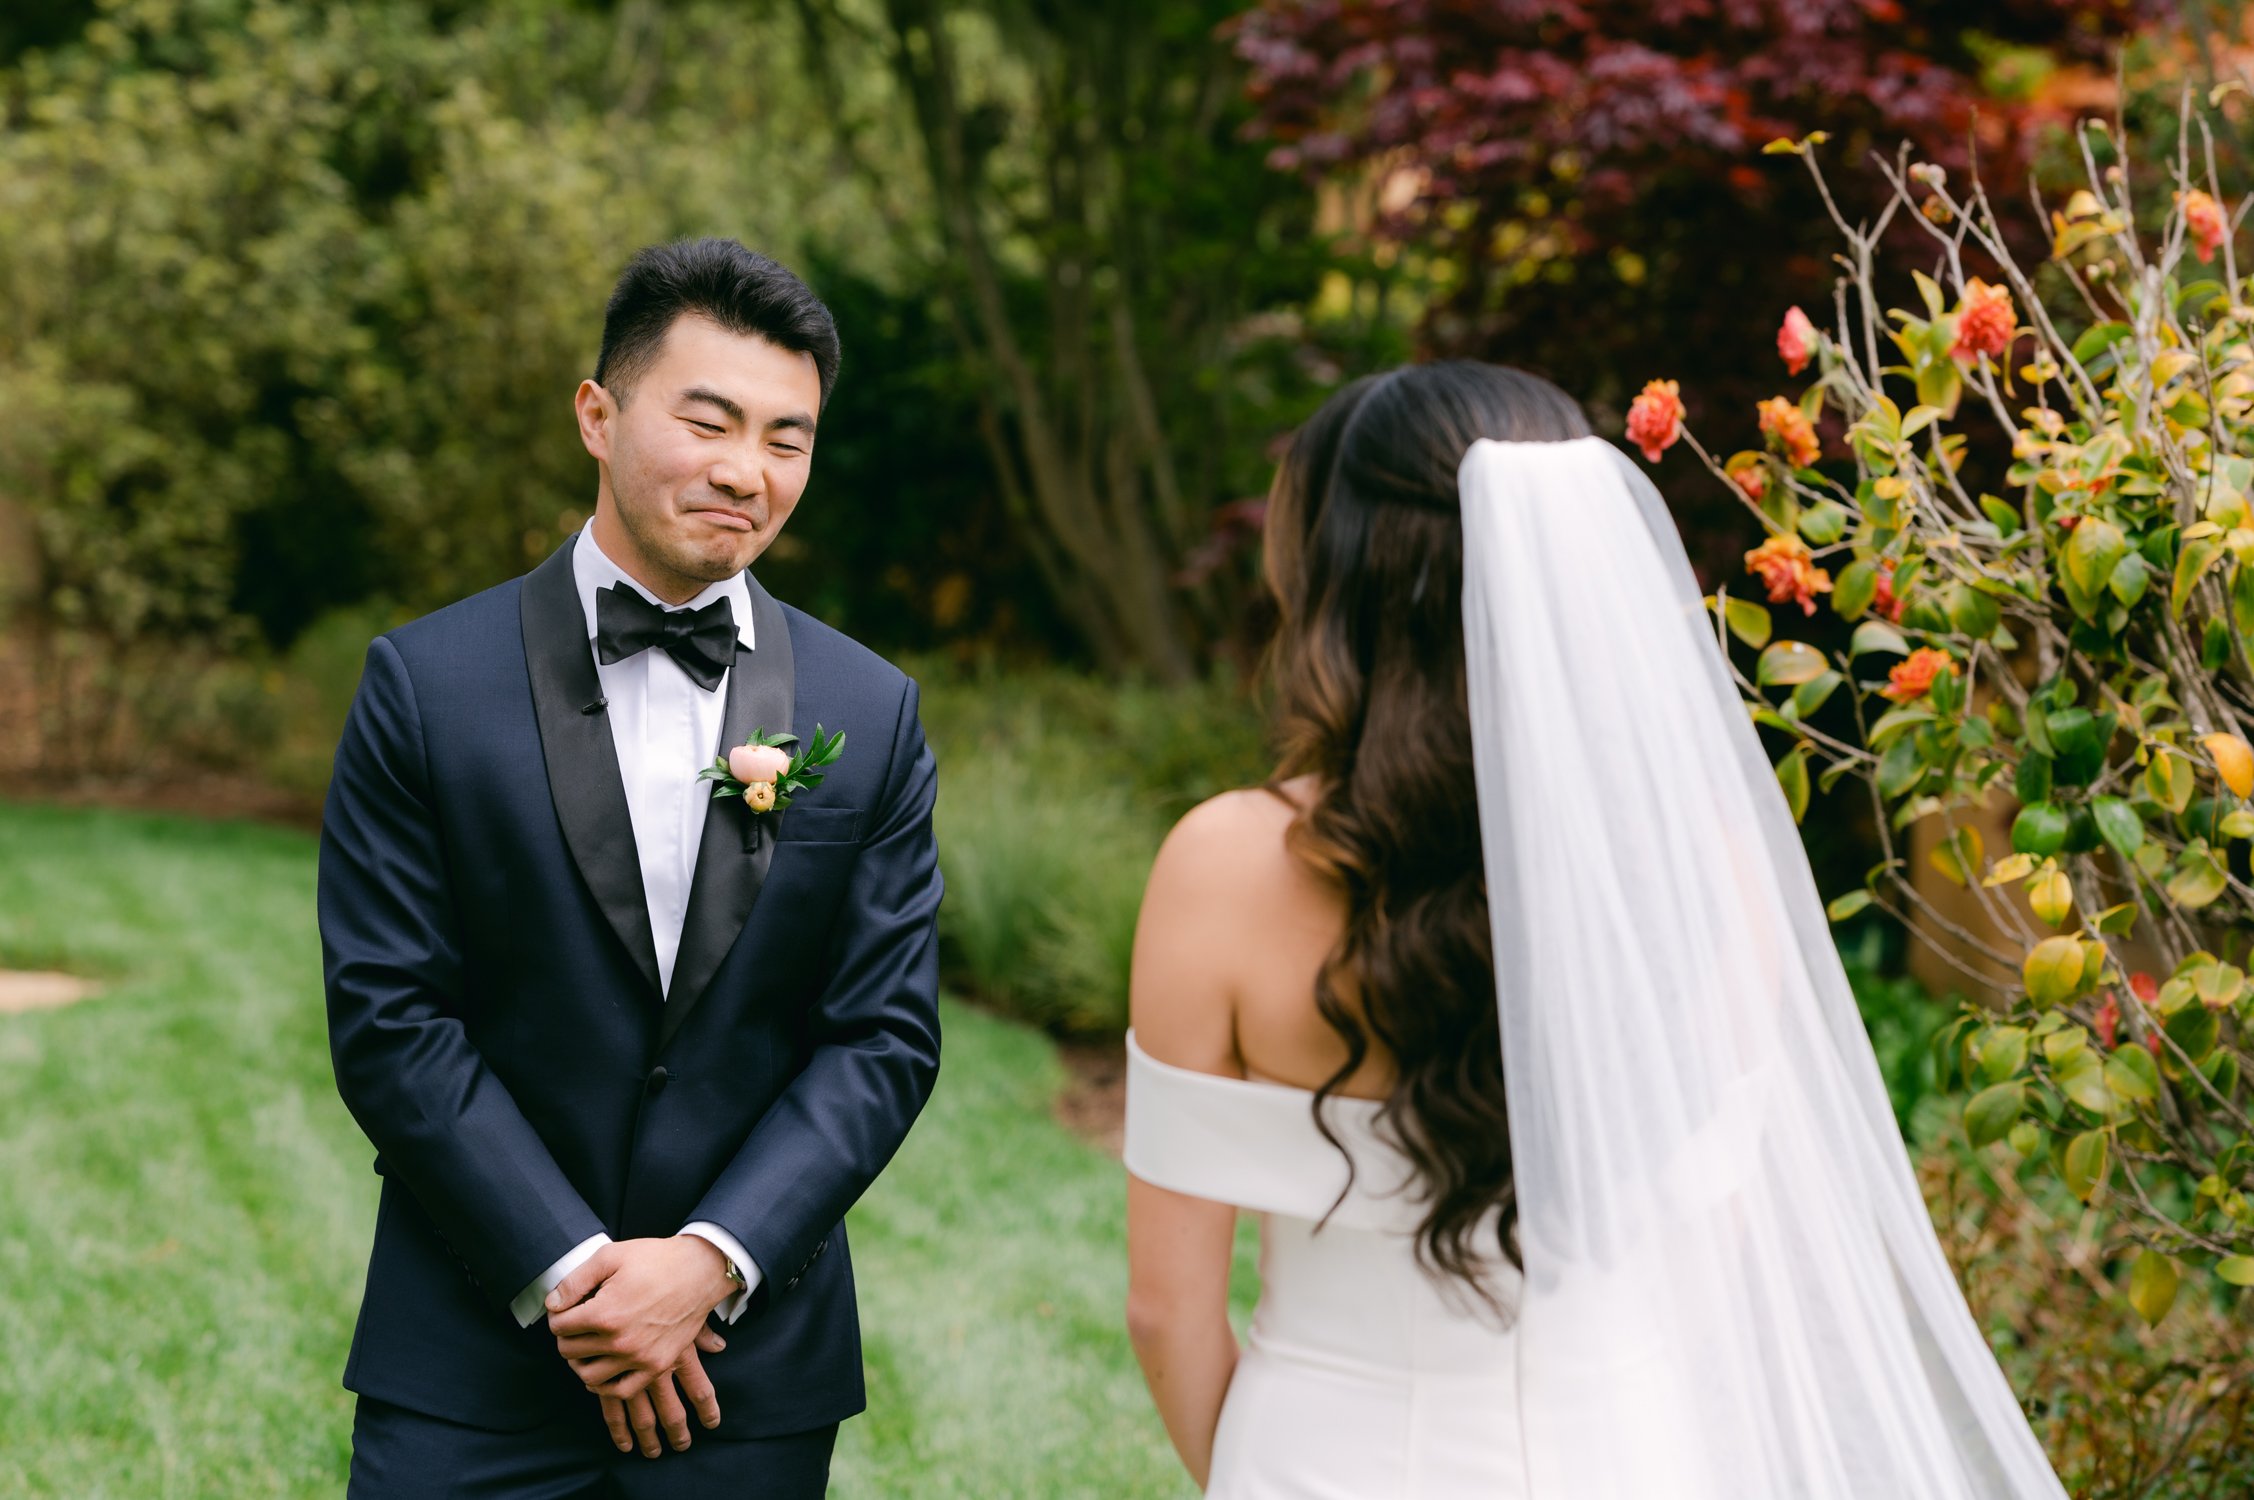 Pebble Beach Resort wedding, photo of groom's reaction during the first-look